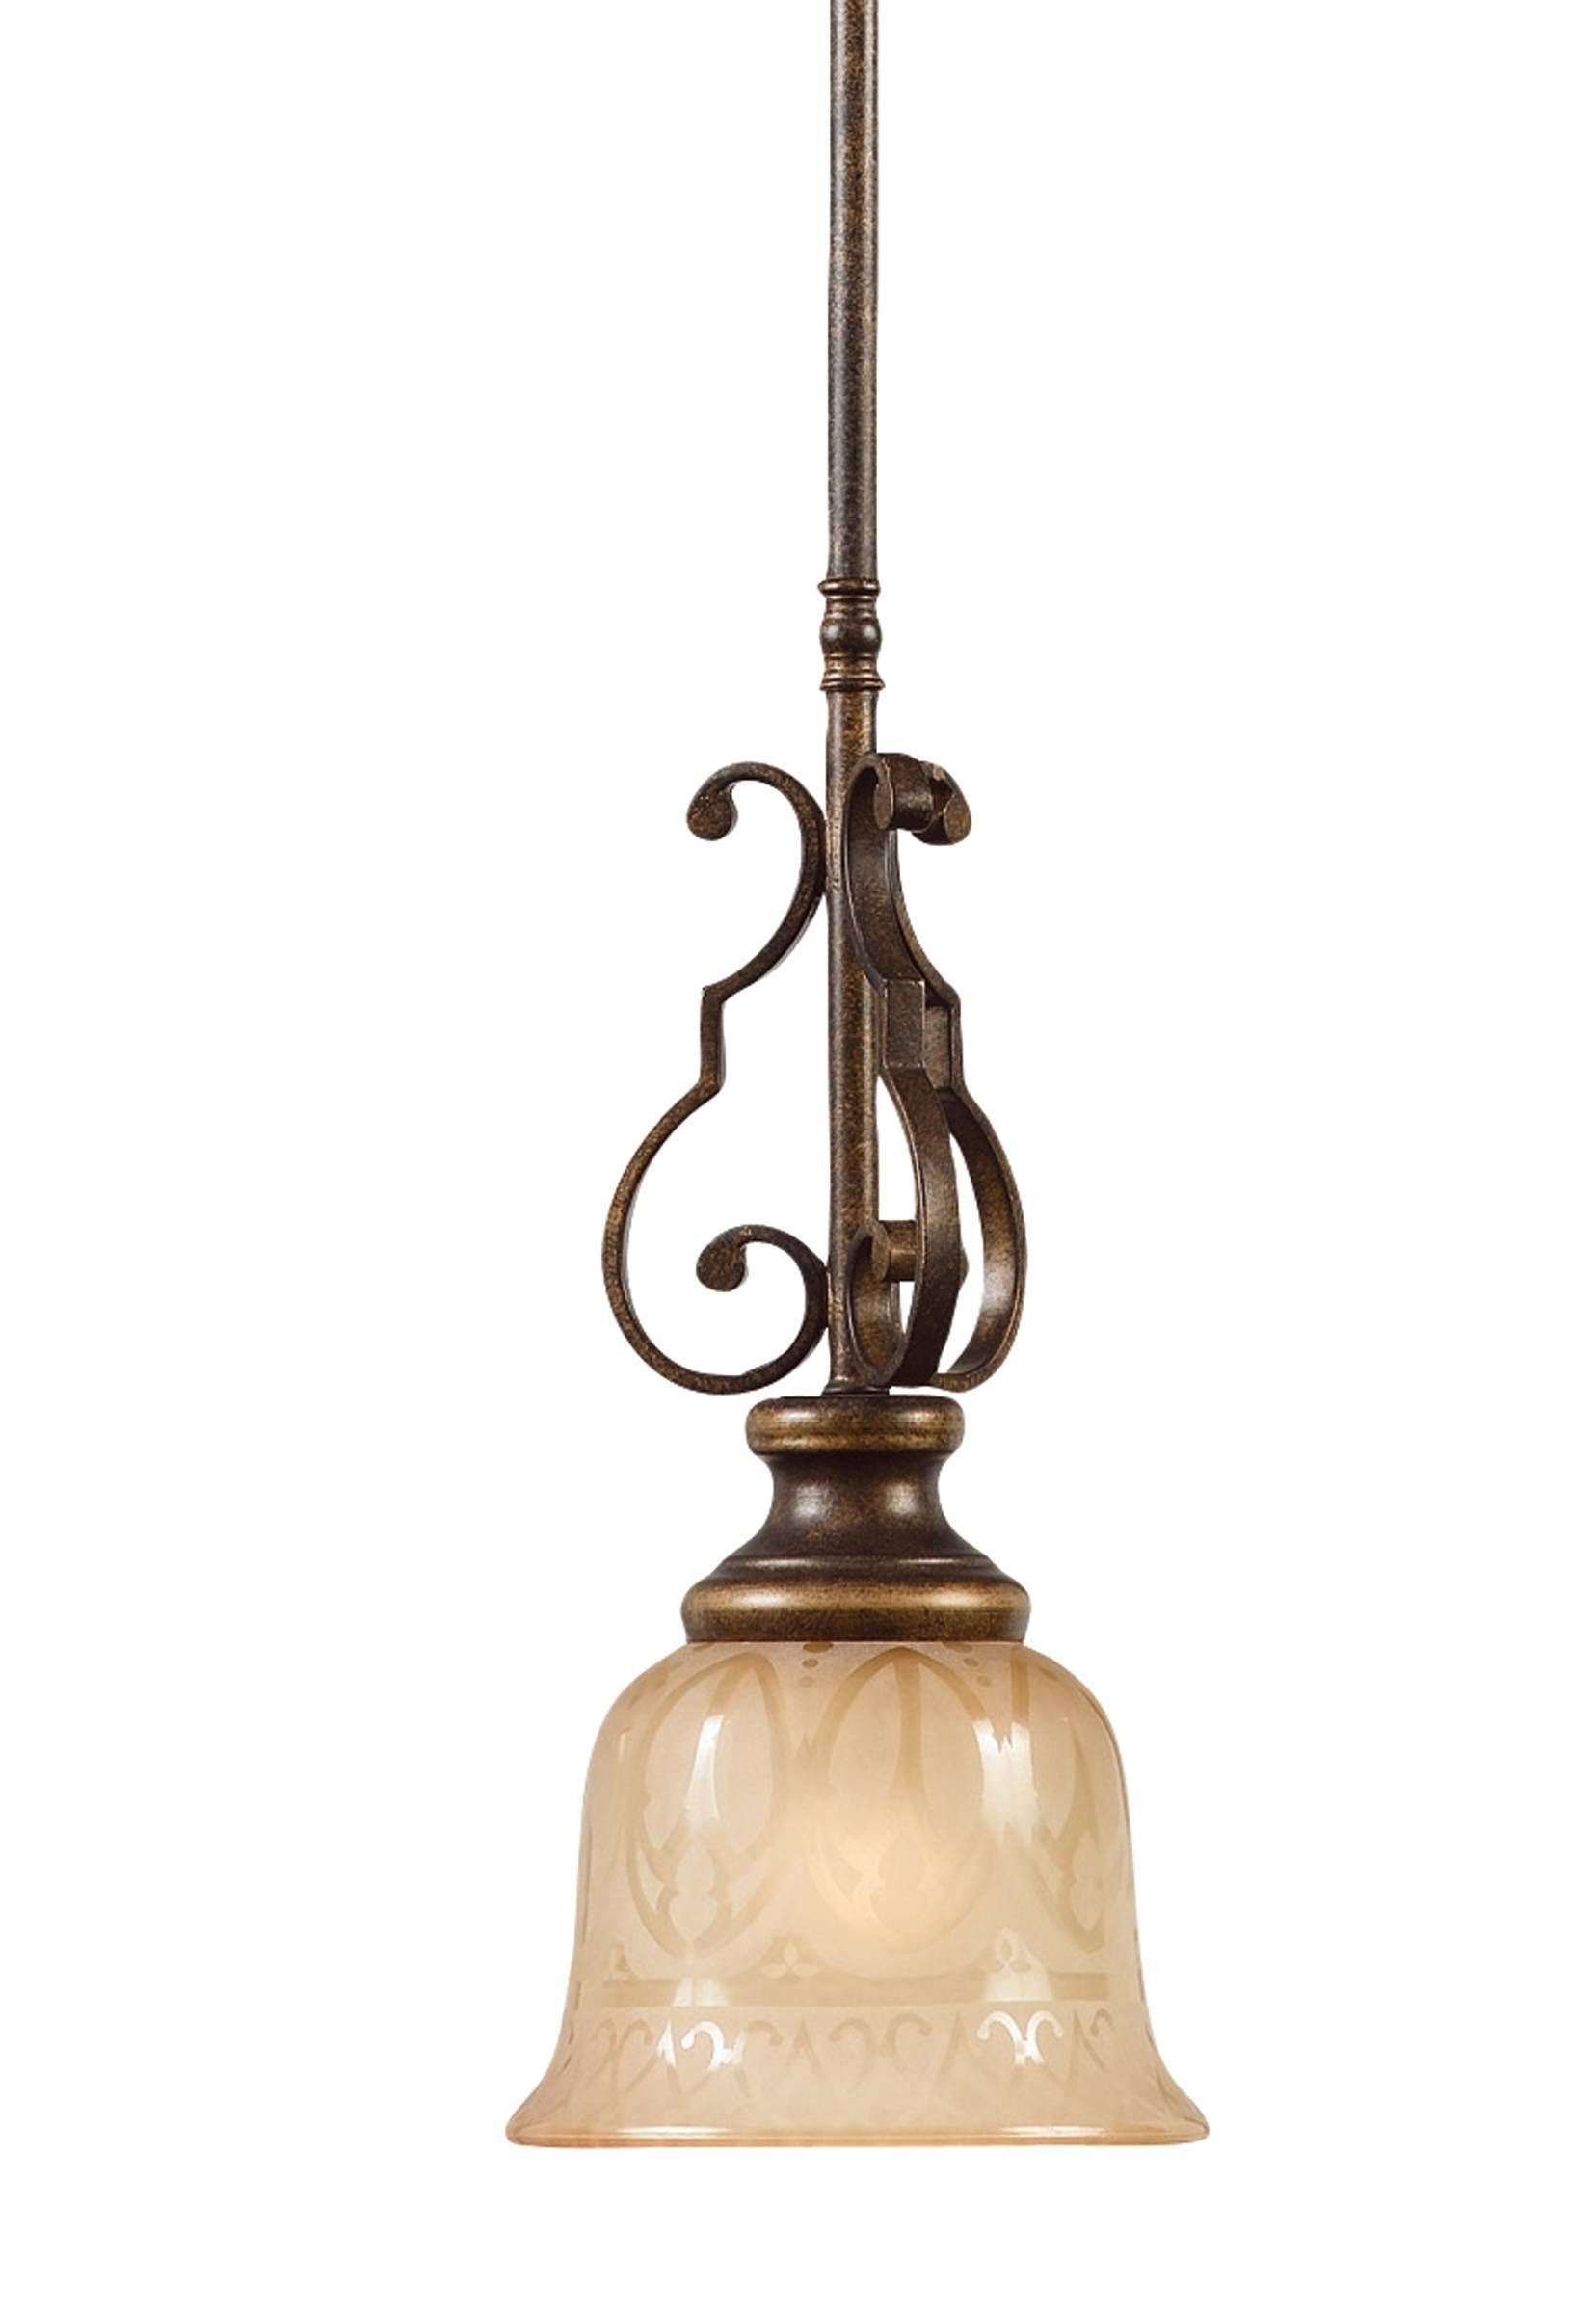 Home Lighting : Agreeable Wrought Iron Track Lighting, Wrought With Regard To Wrought Iron Mini Pendant Lights (View 11 of 15)